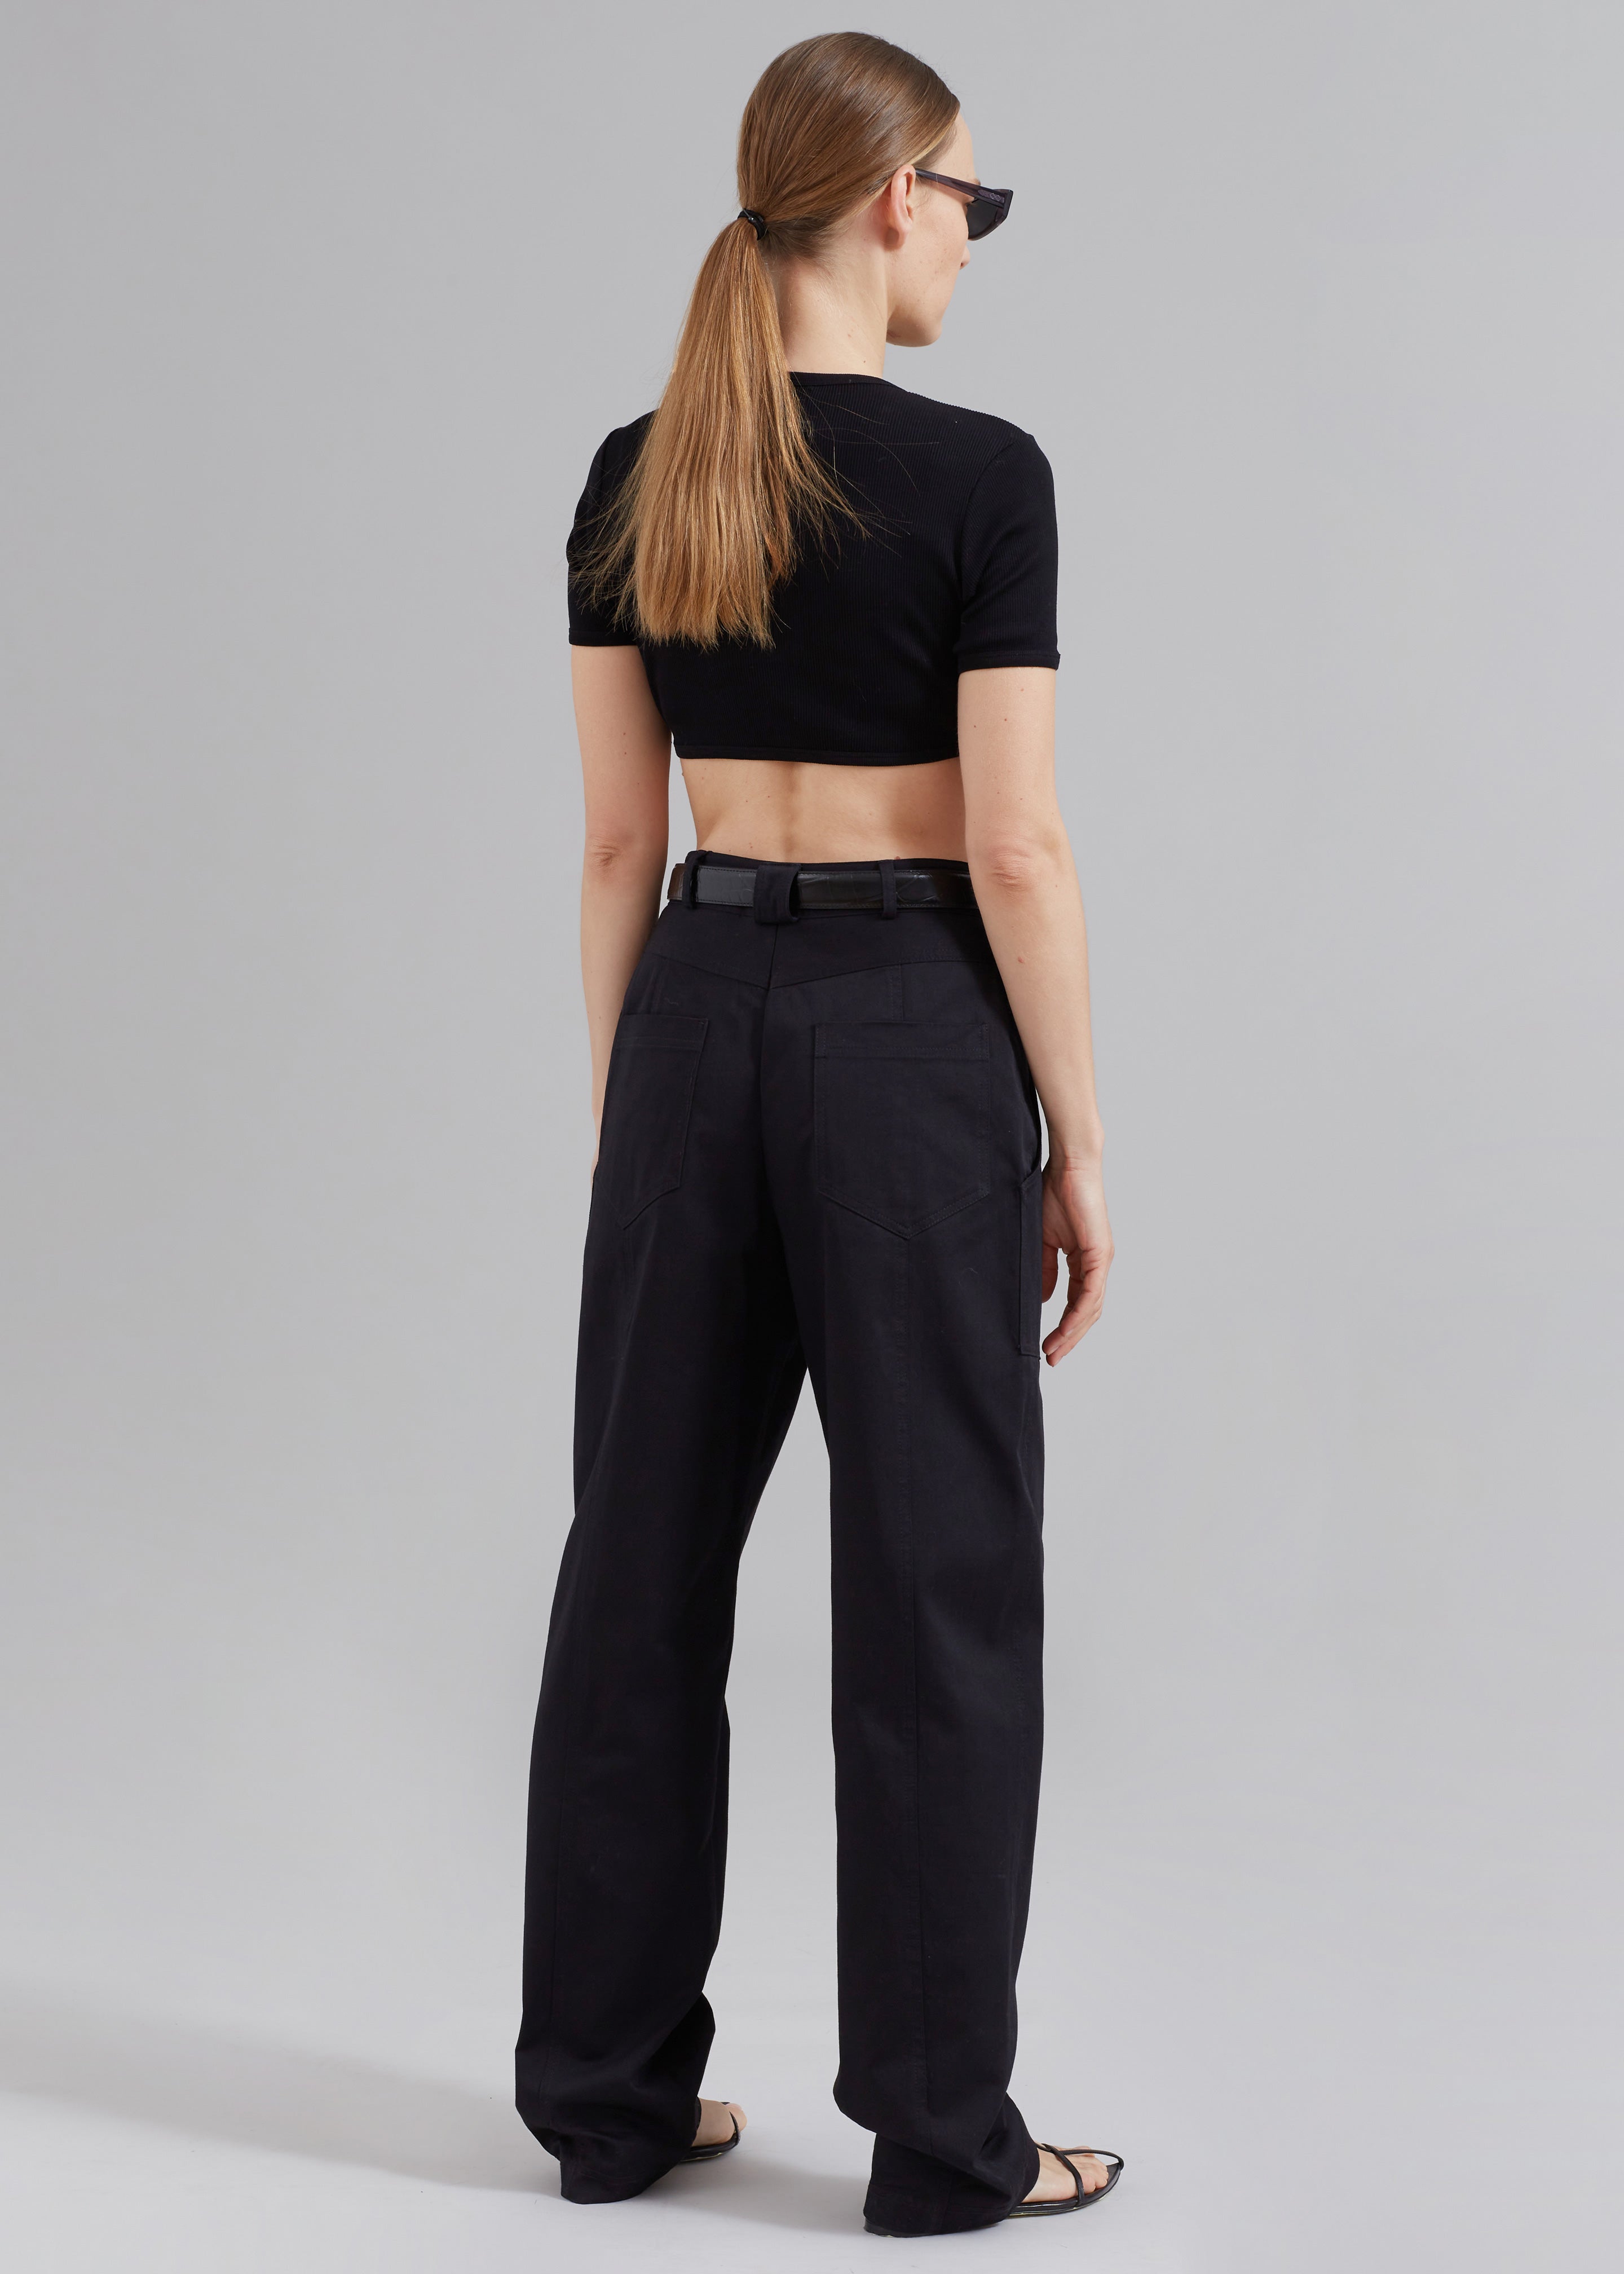 Oversized utility trousers - Black - Ladies | H&M IN